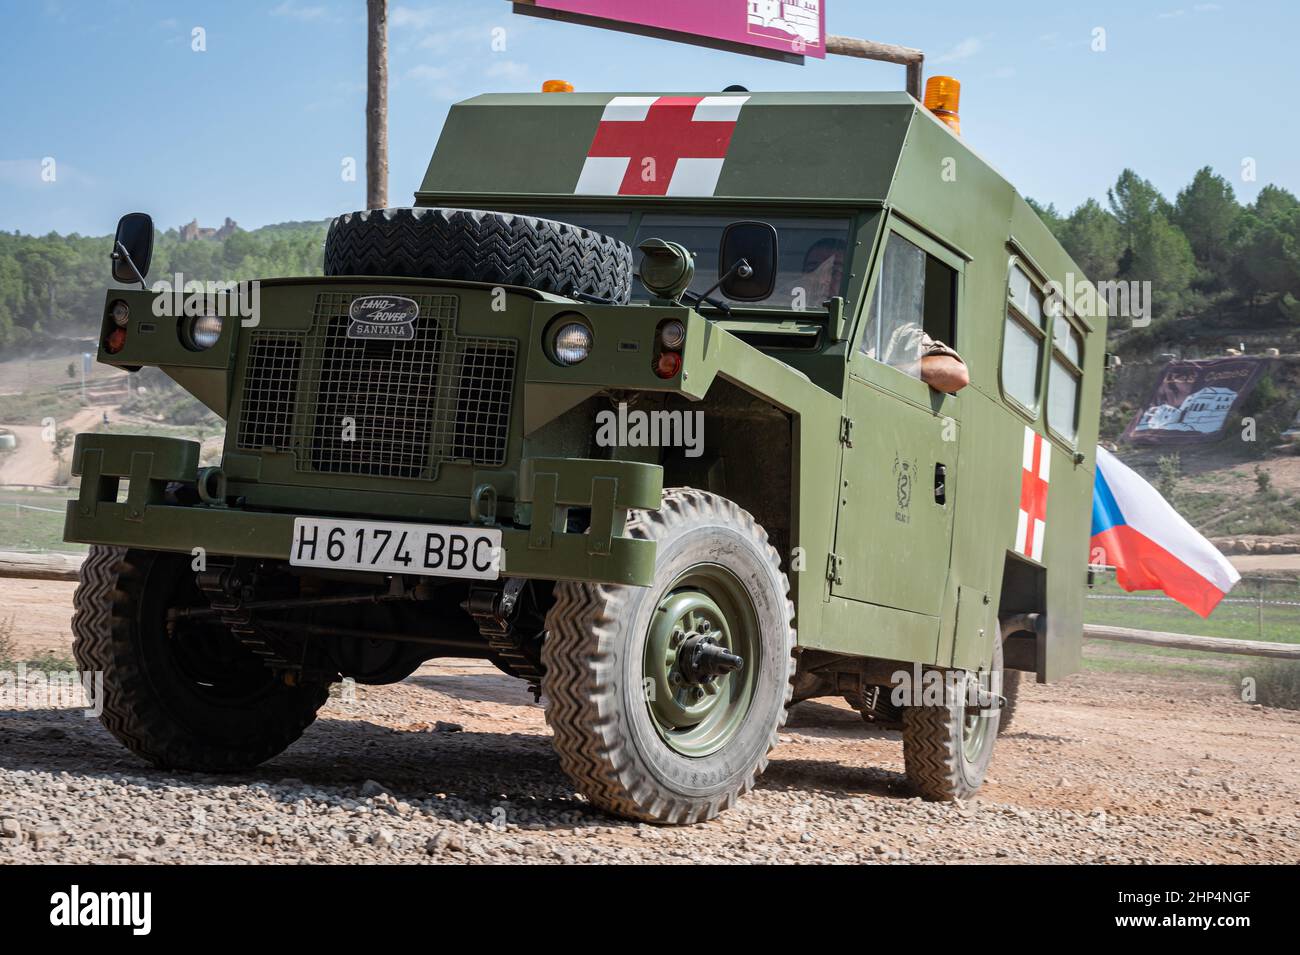 View of Land Rover Santana Ligero military ambulance model vehicle on a sunny day in Suria, Spain Stock Photo